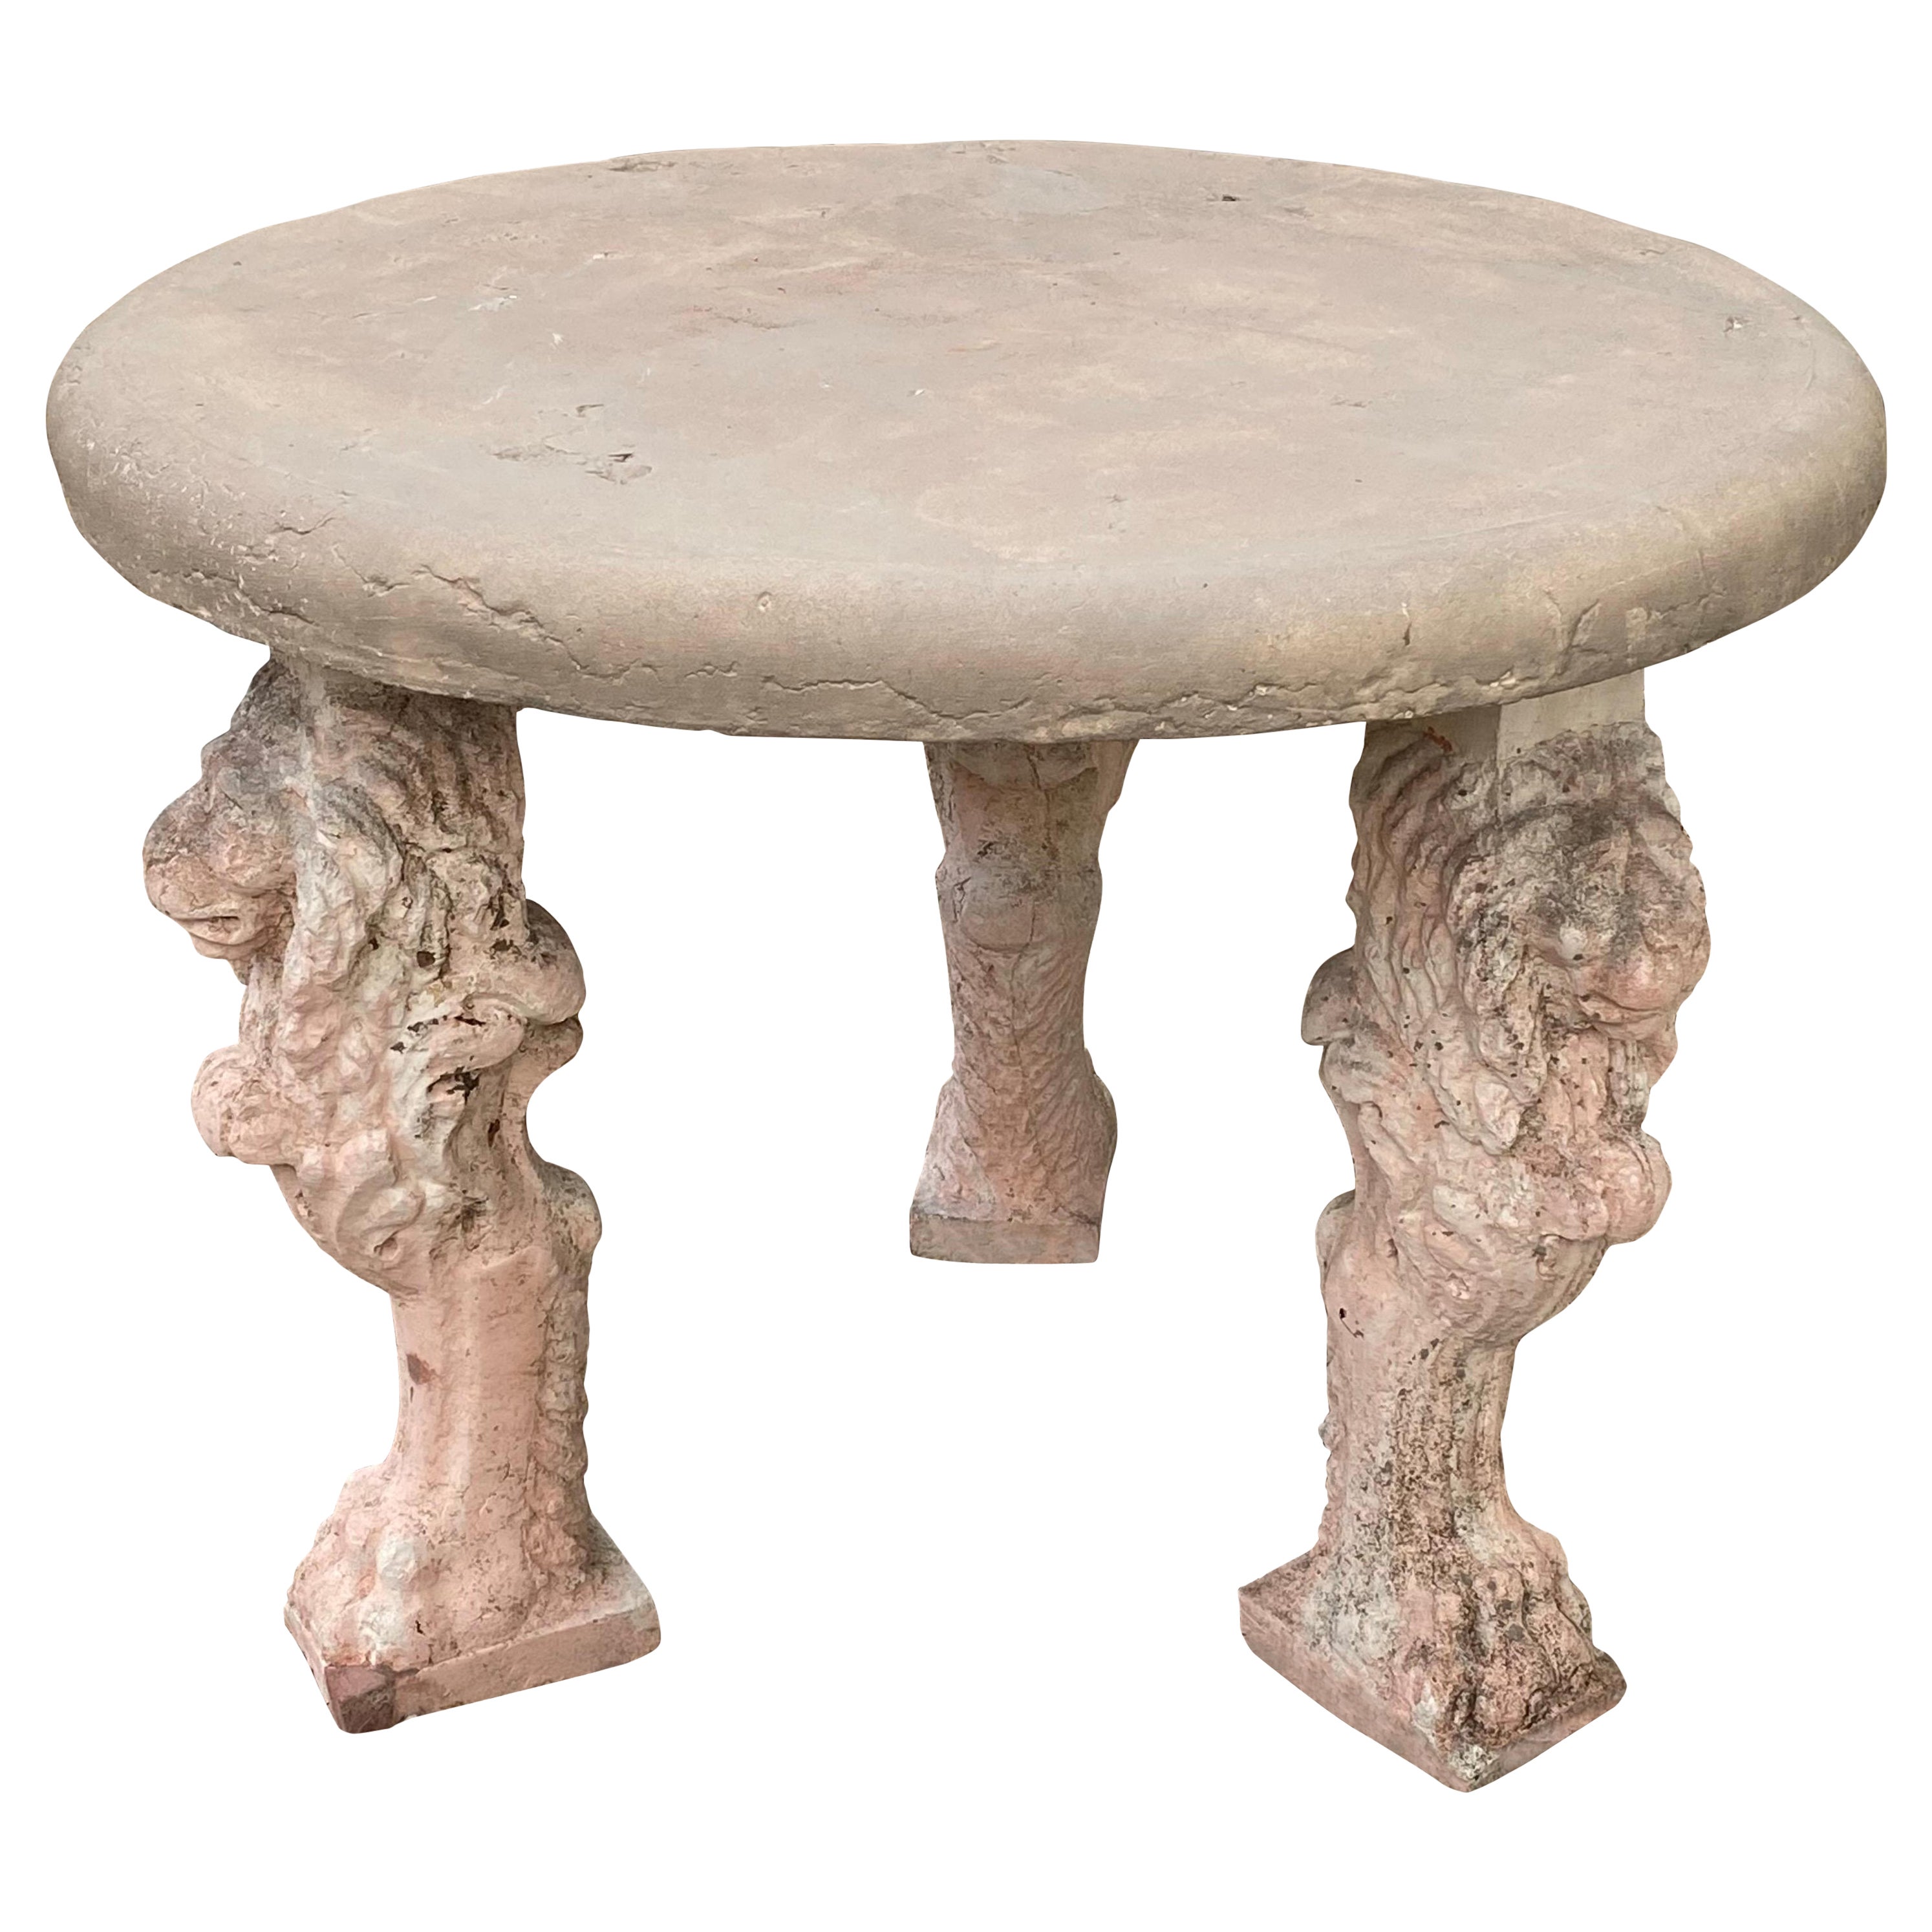 Antique Cast Stone Table with 3 Lion Figured Legs